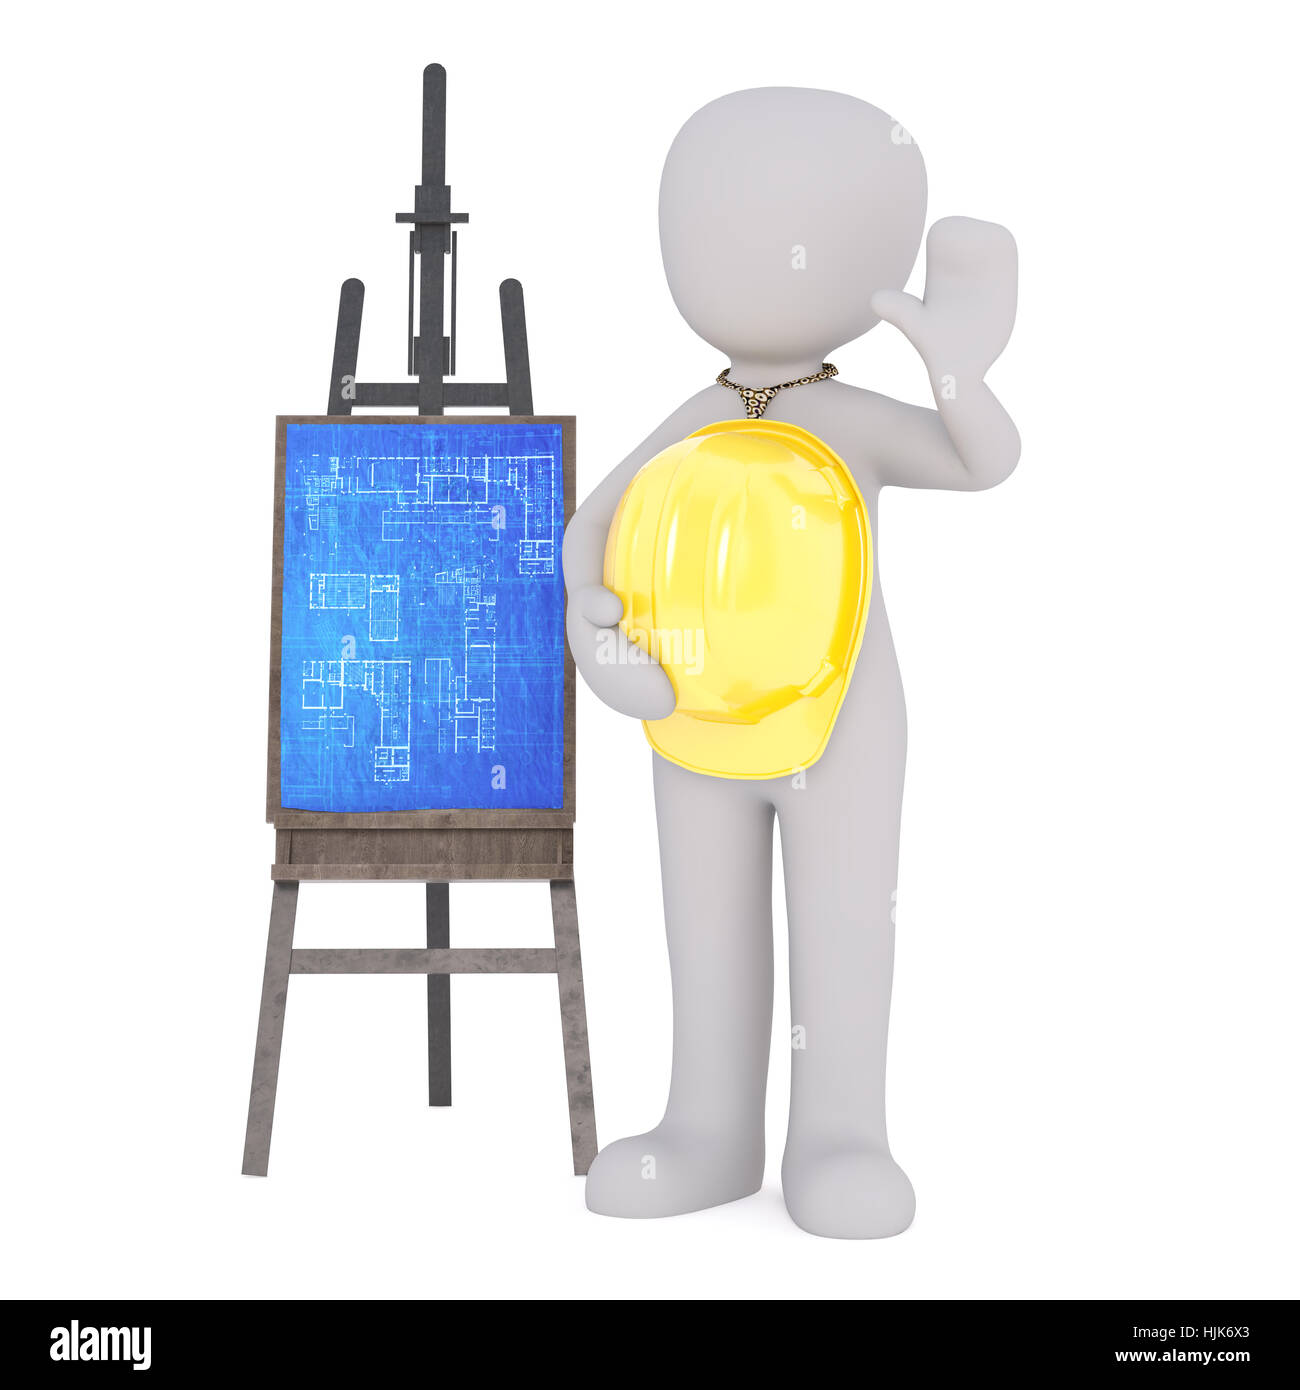 3d Rendering of Cartoon Character Wearing Tie and Holding Yellow Hard Hat with Hand Cupping Ear to Hear Better While Standing Beside Blueprints on Eas Stock Photo